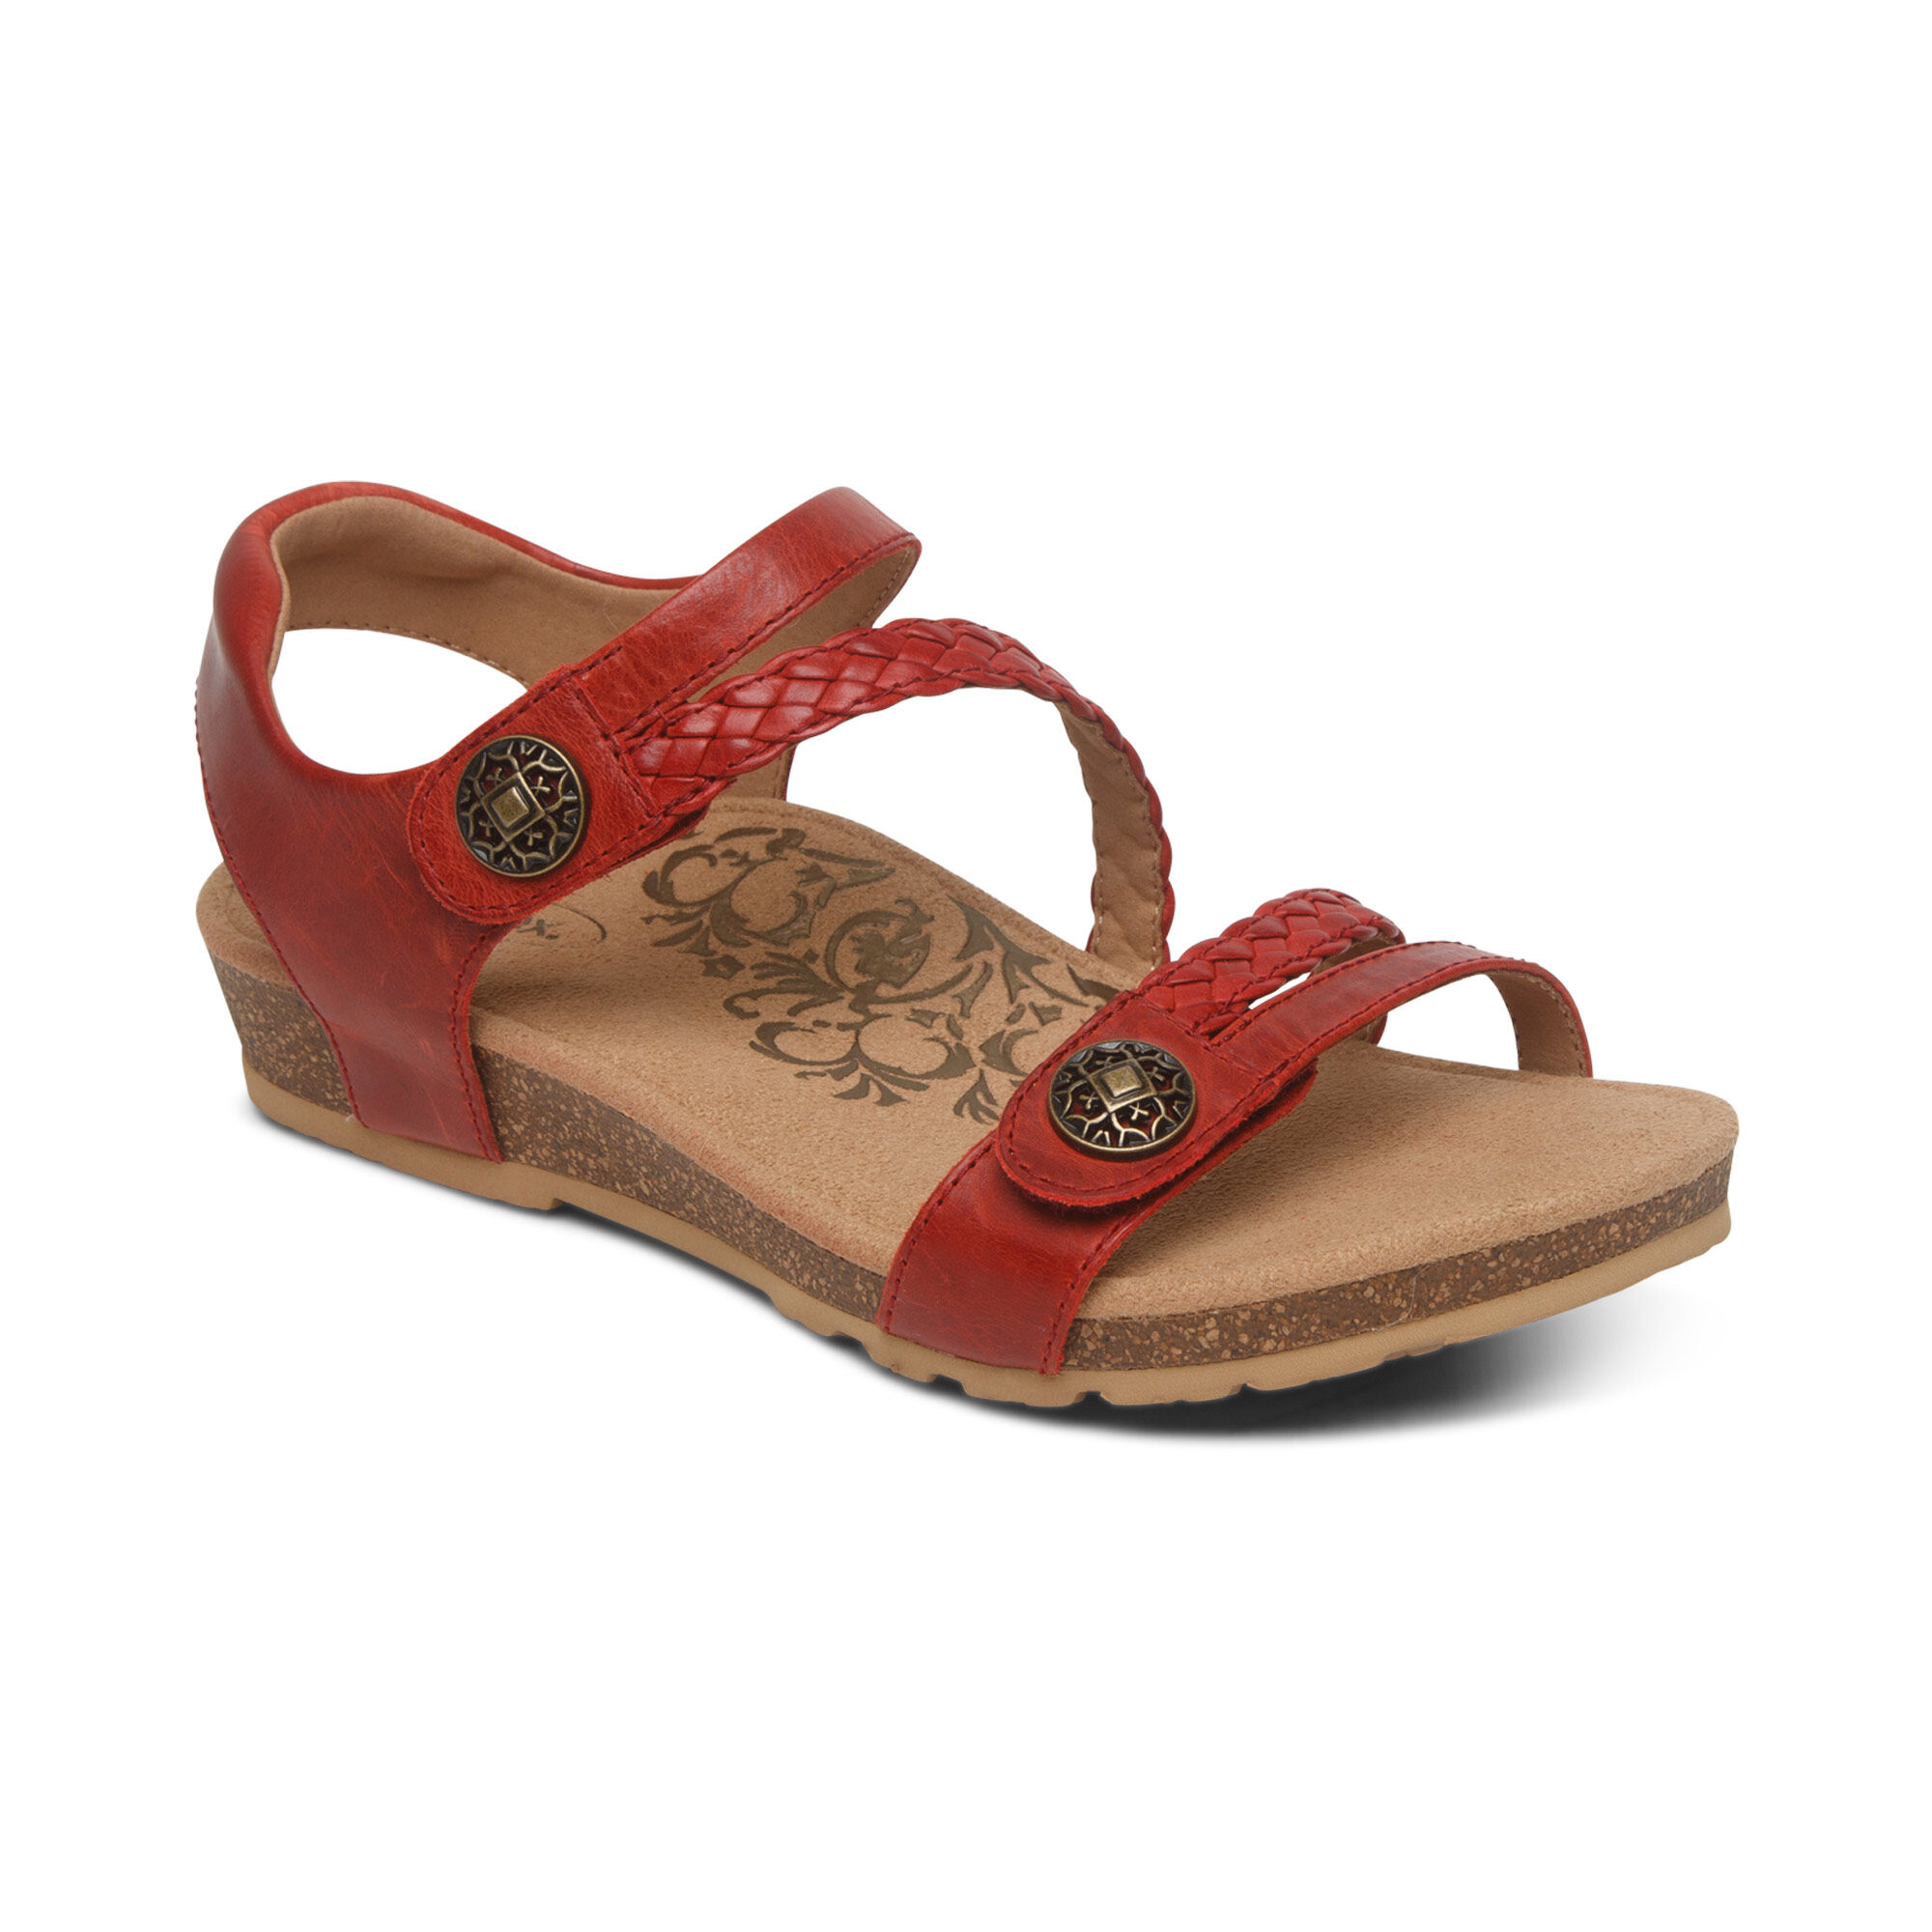 QUIRA 150mm platform ankle-strap clogs - Red